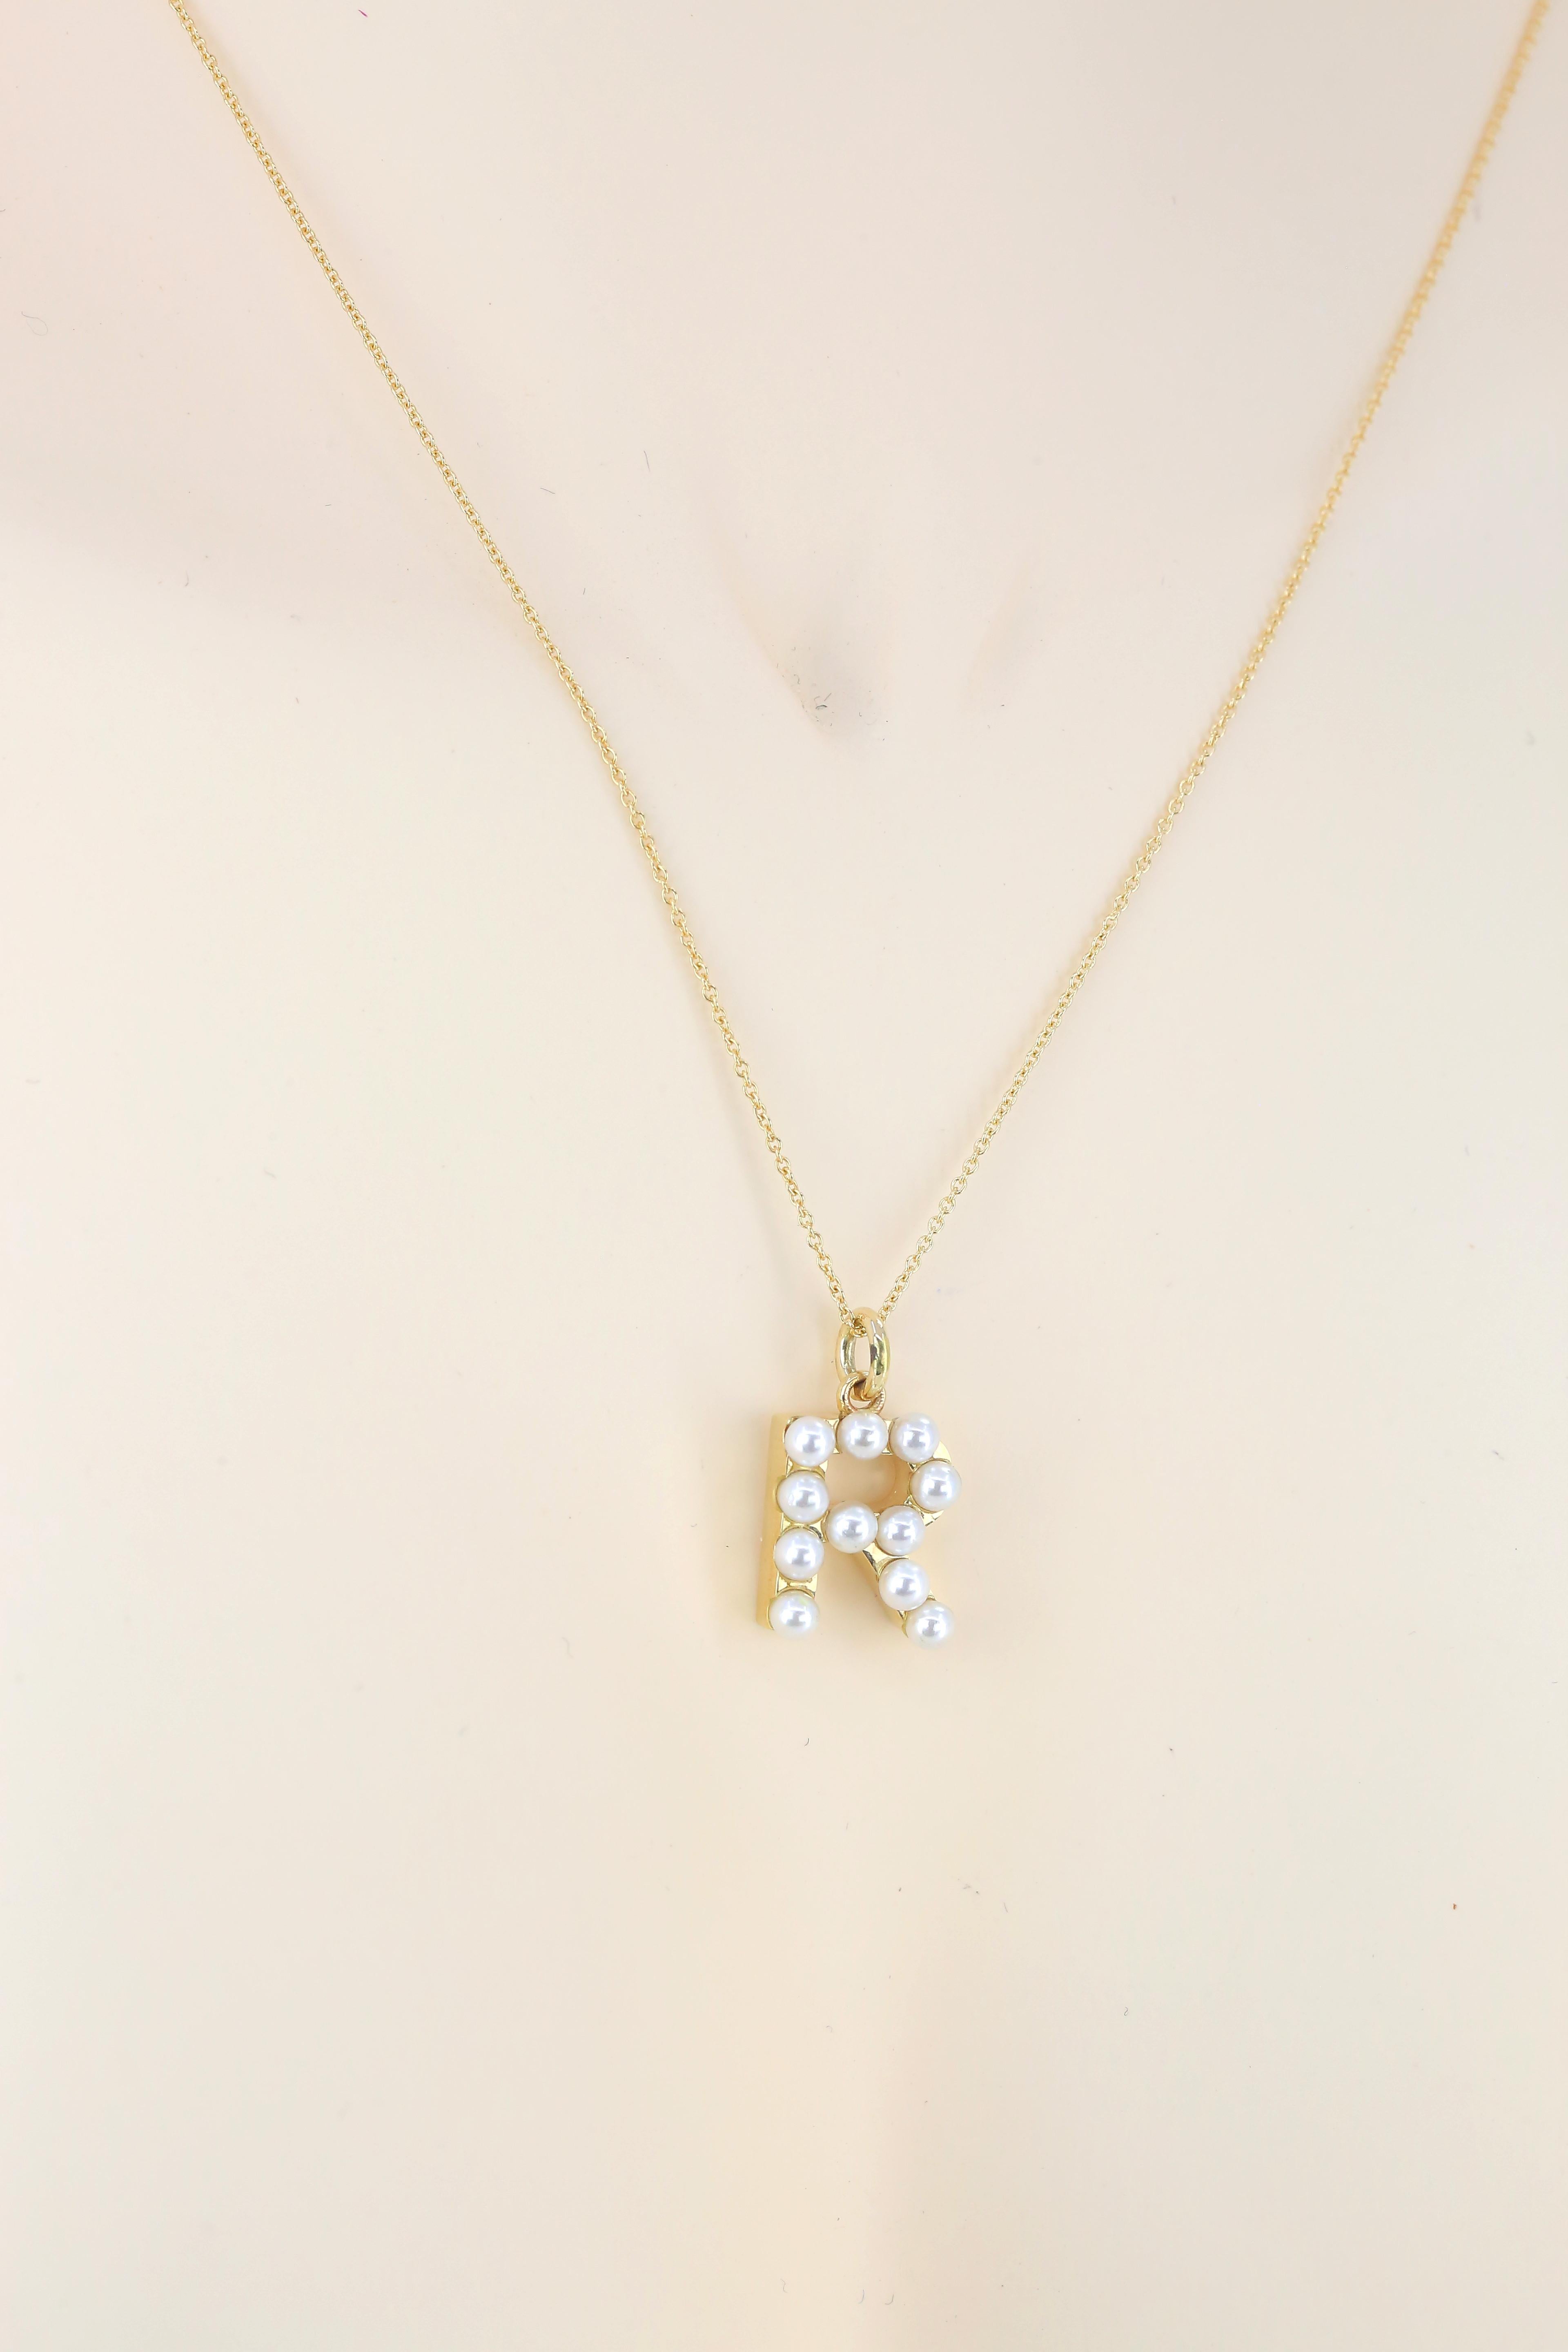 r initial necklace